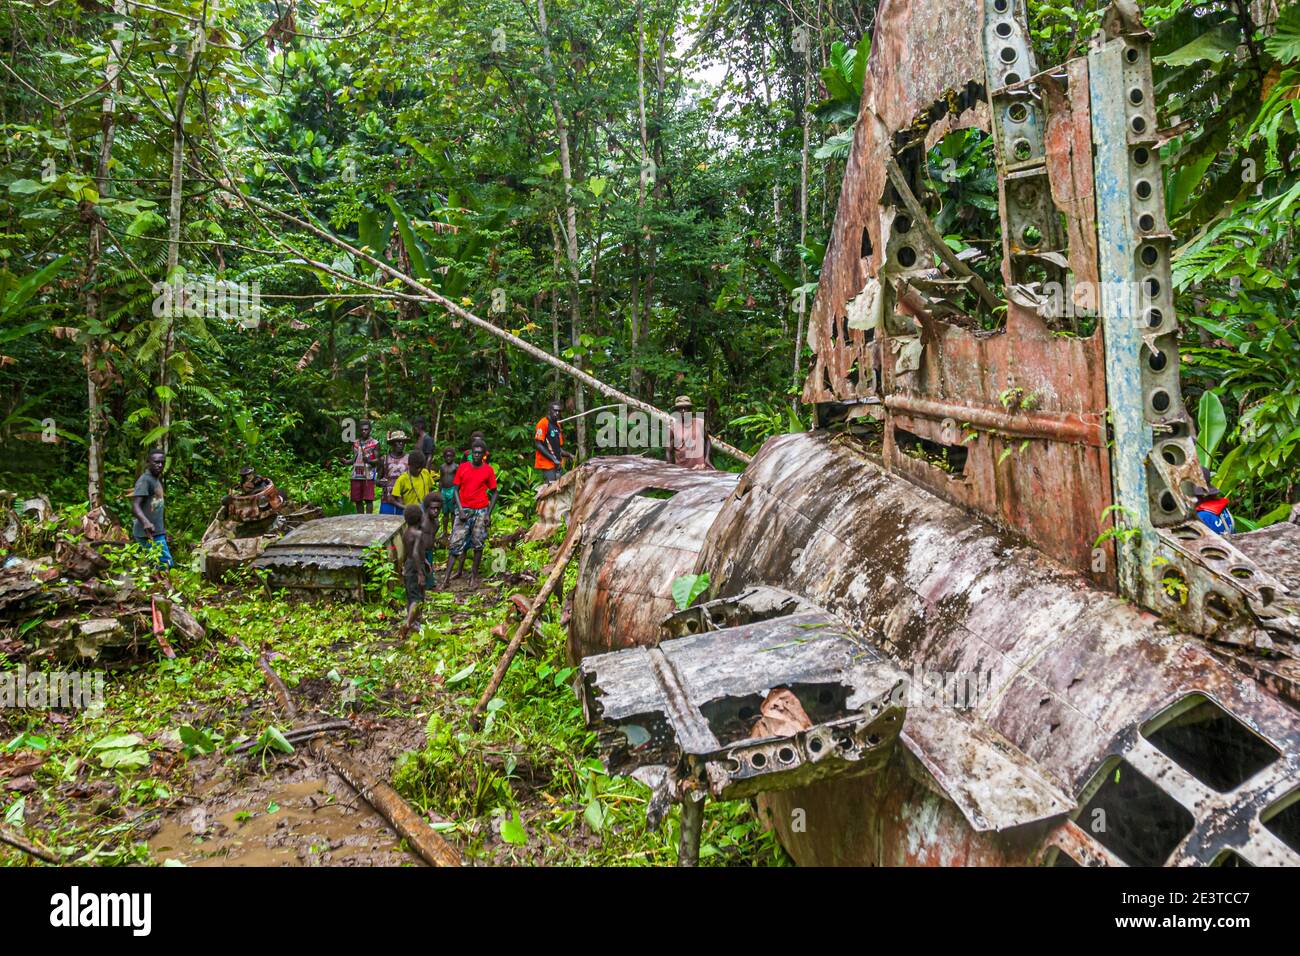 Wrack of Japanese Admiral Yamamoto's Aircraft in the jungle of Bougainville, Papua New Guinea Stock Photo